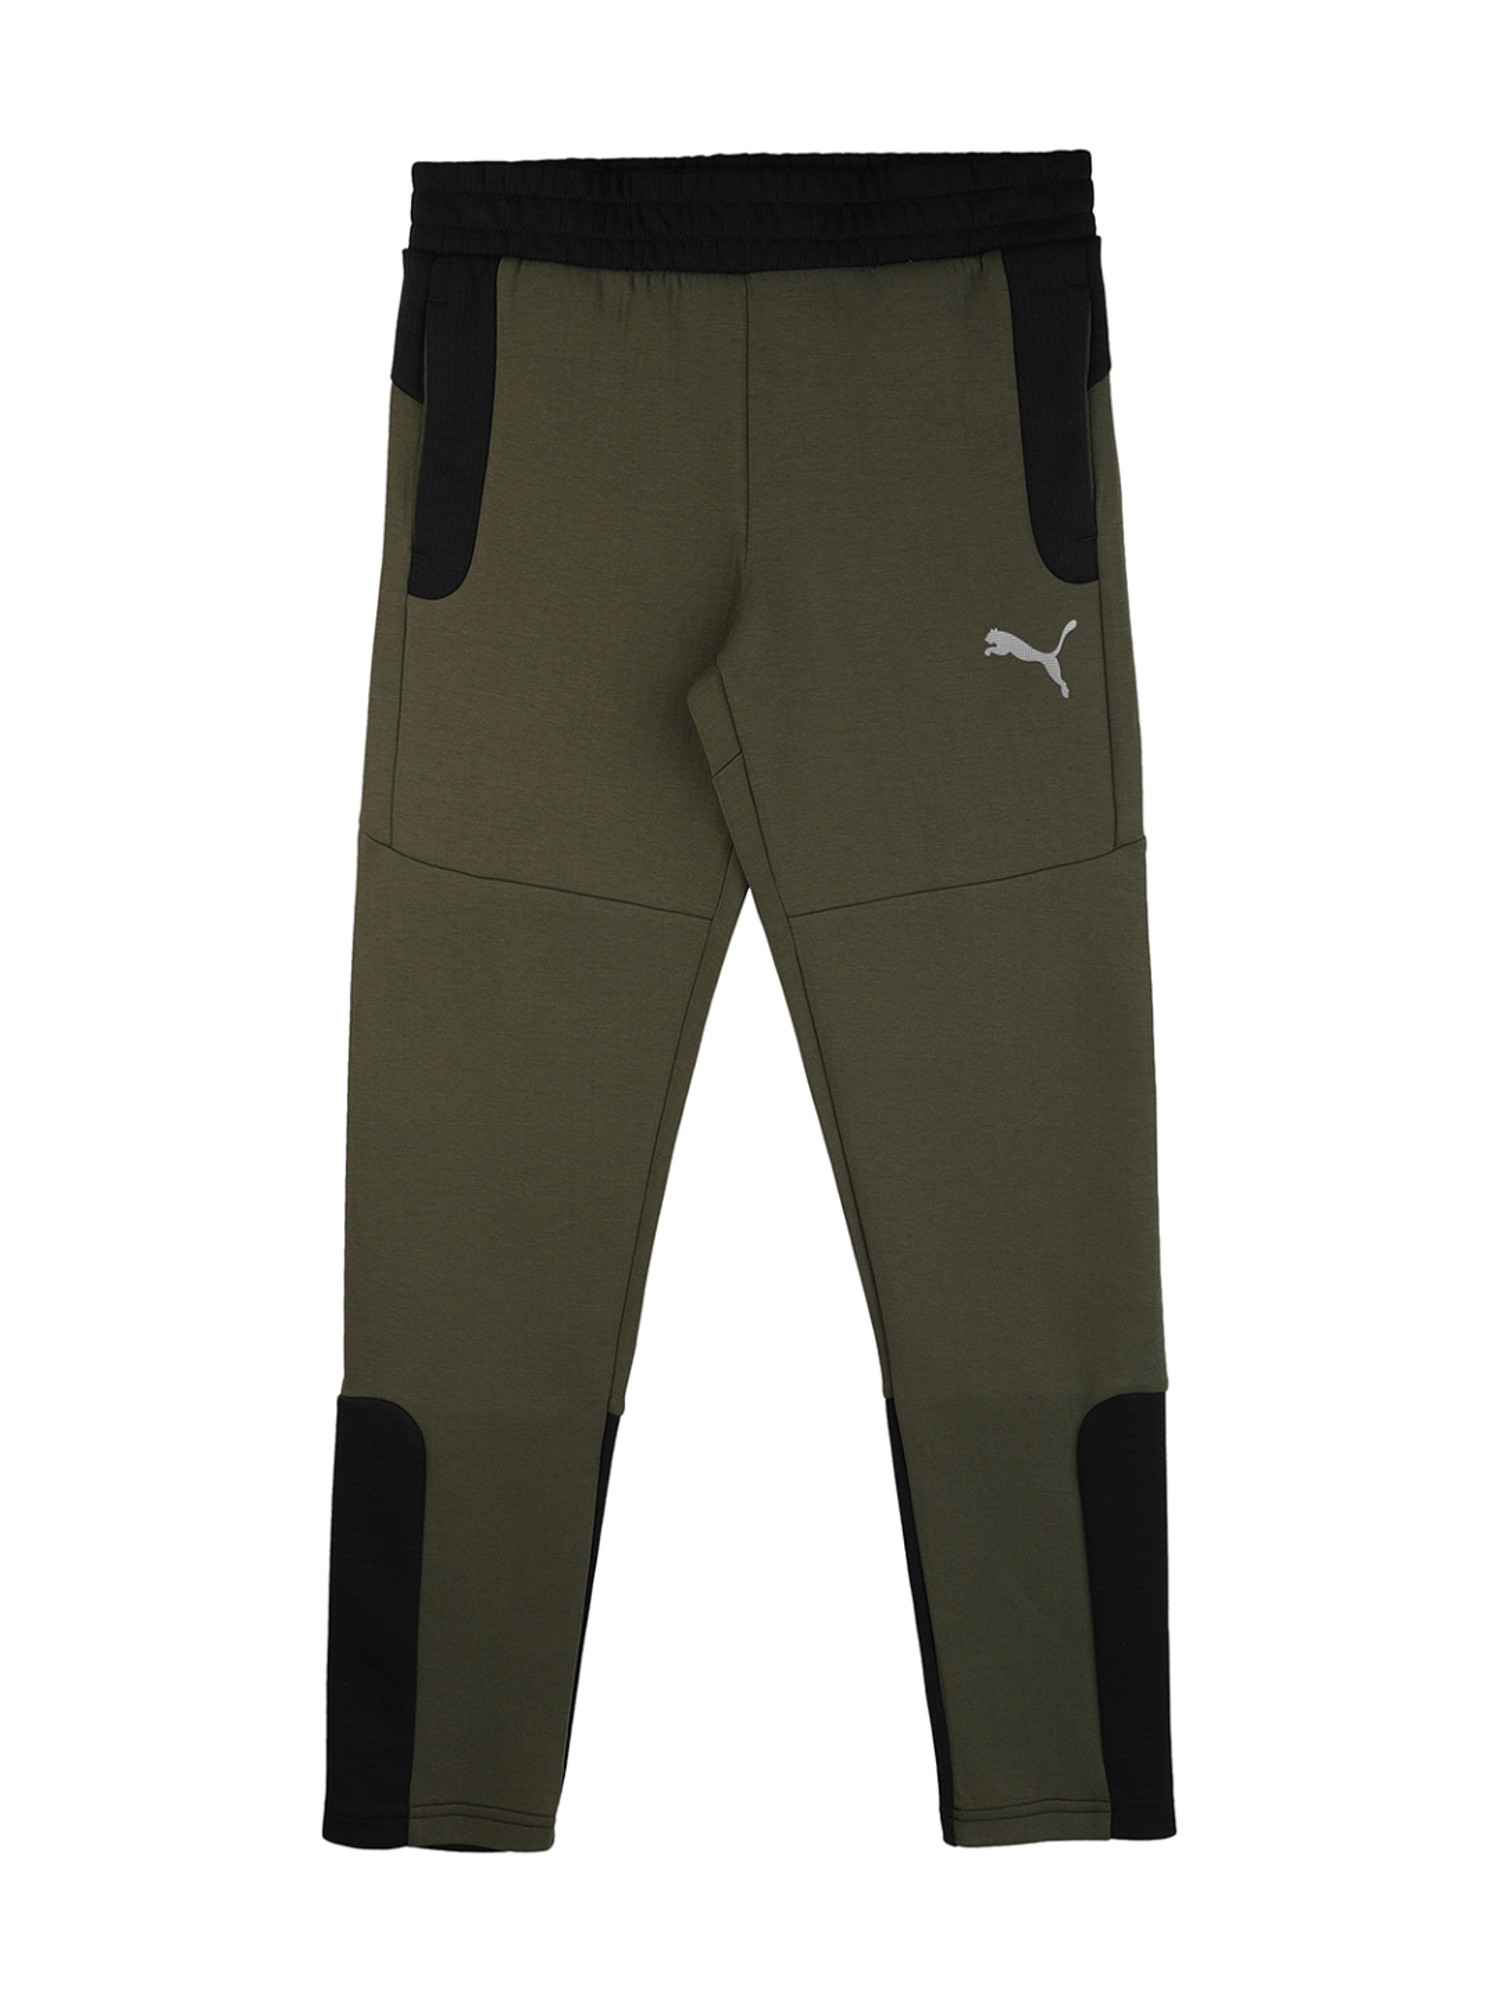 Puma Lower - Puma Athletic Pant Price Starting From Rs 2,161. Find Verified  Sellers in Bhopal - JdMart